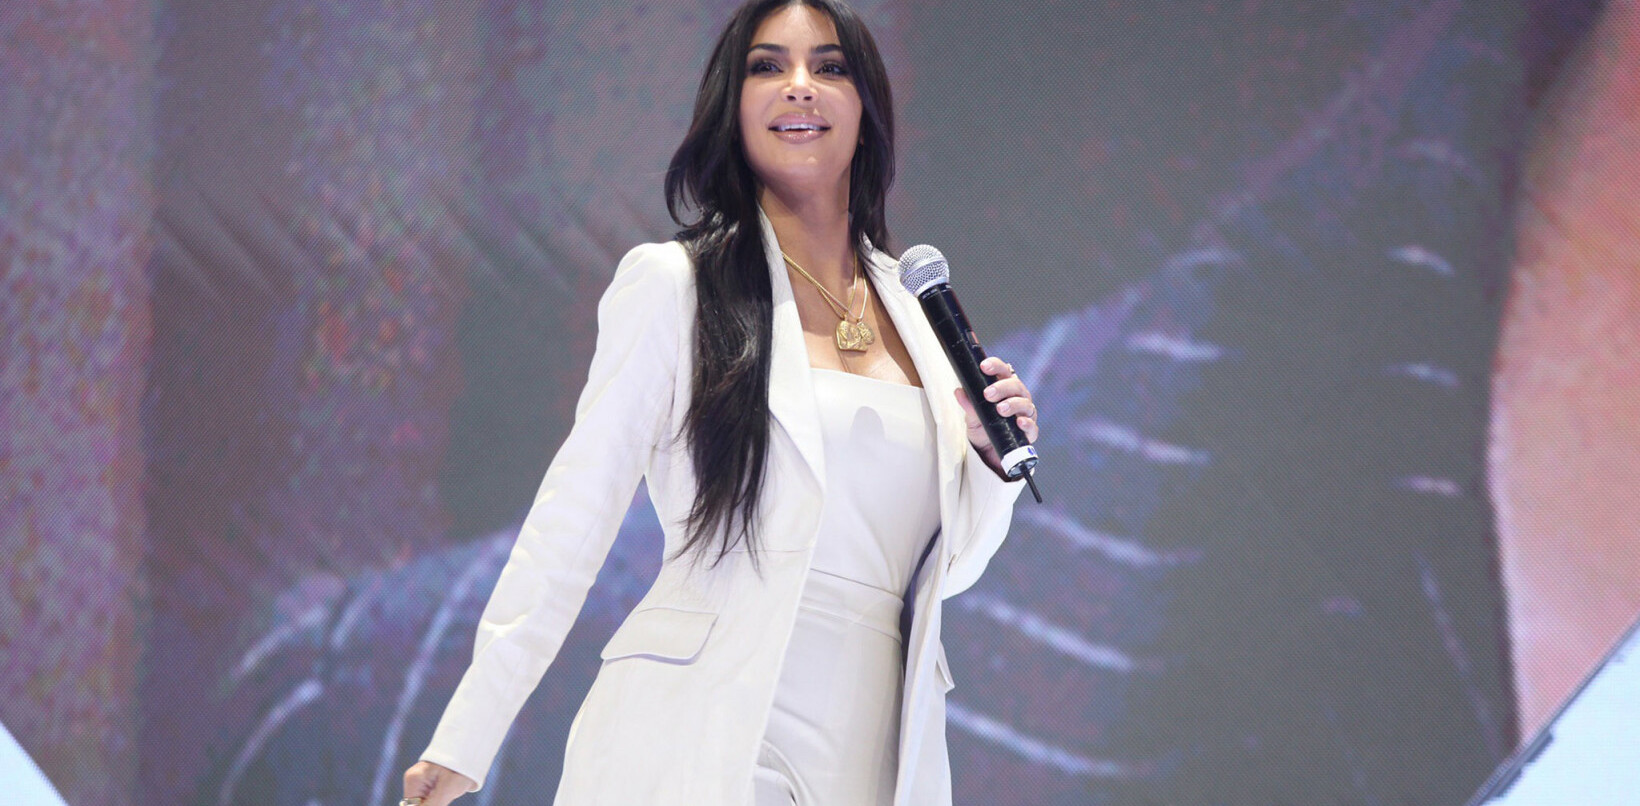 What on earth is Kim Kardashian West doing at a tech conference in Armenia?